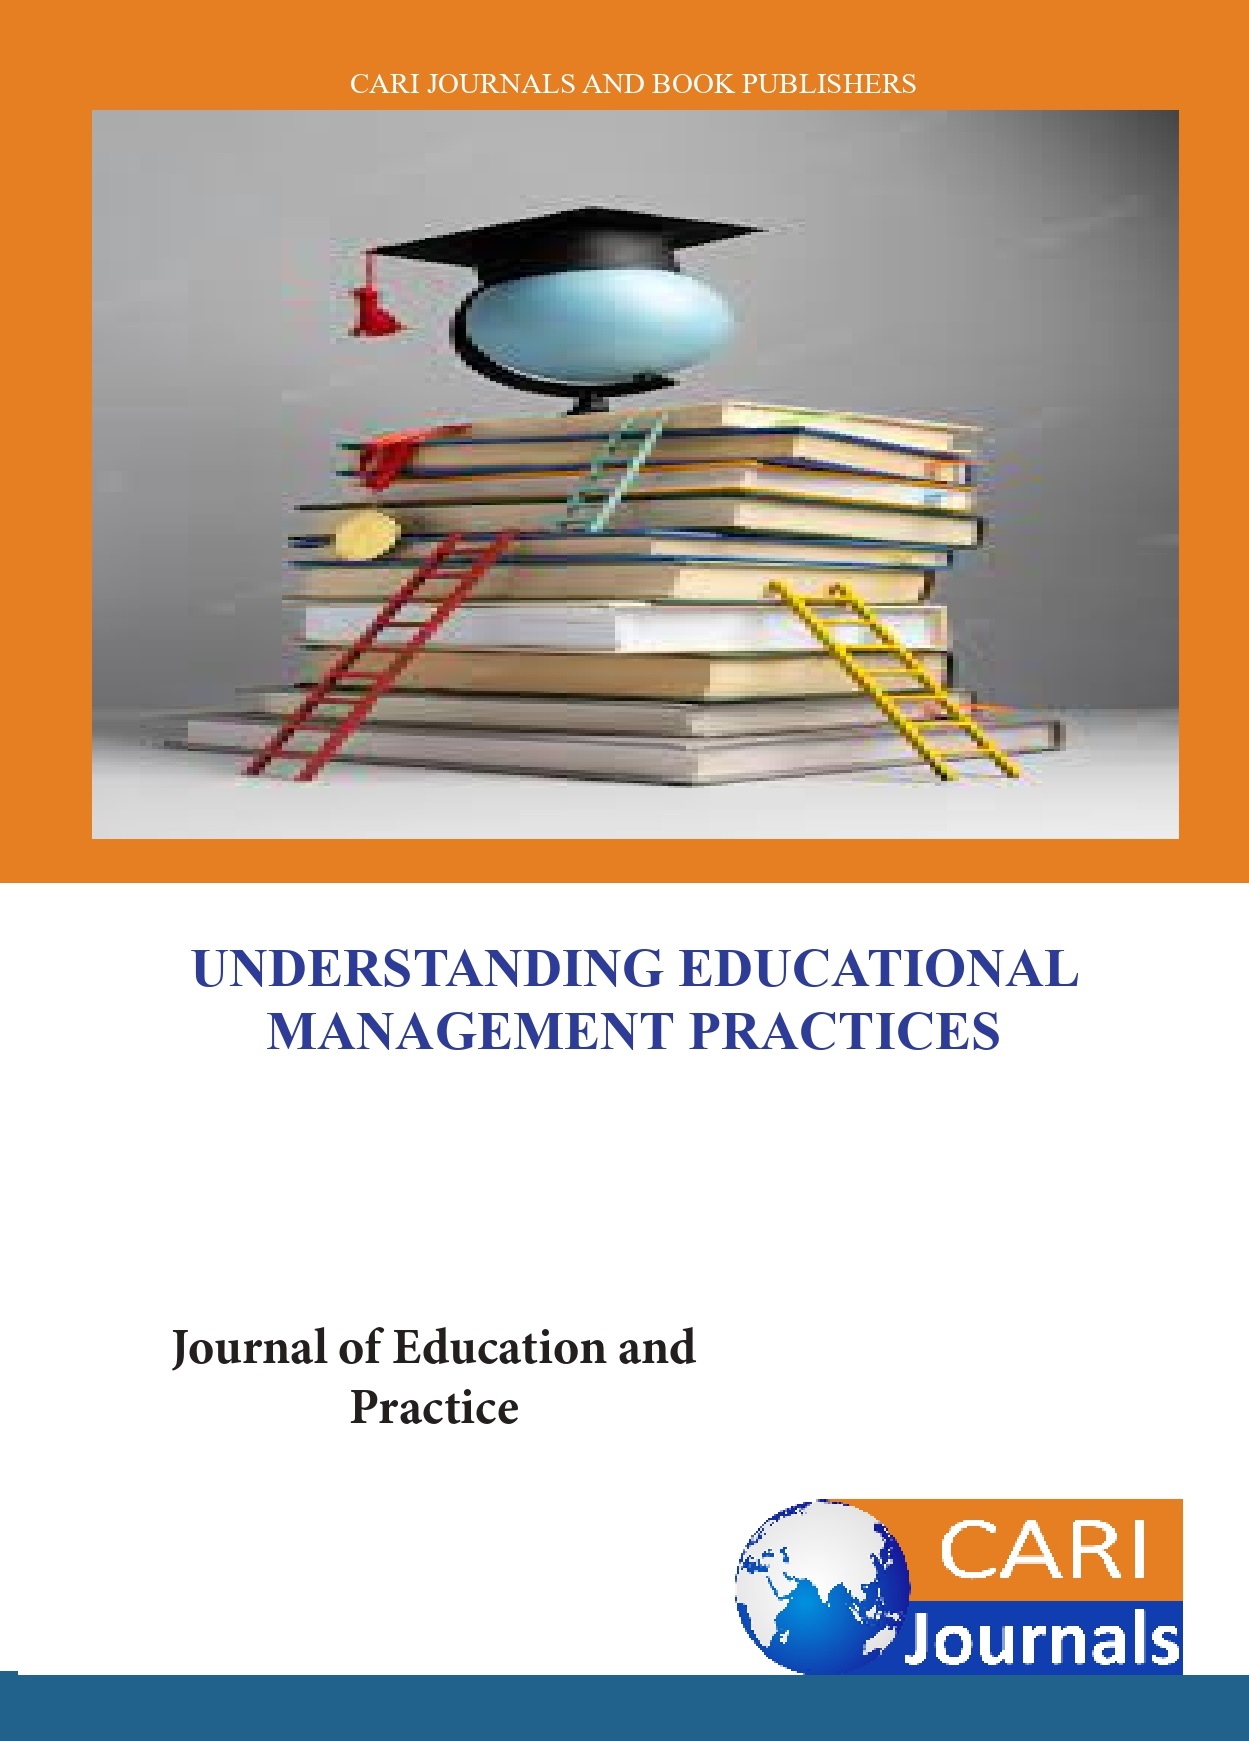 research on educational management